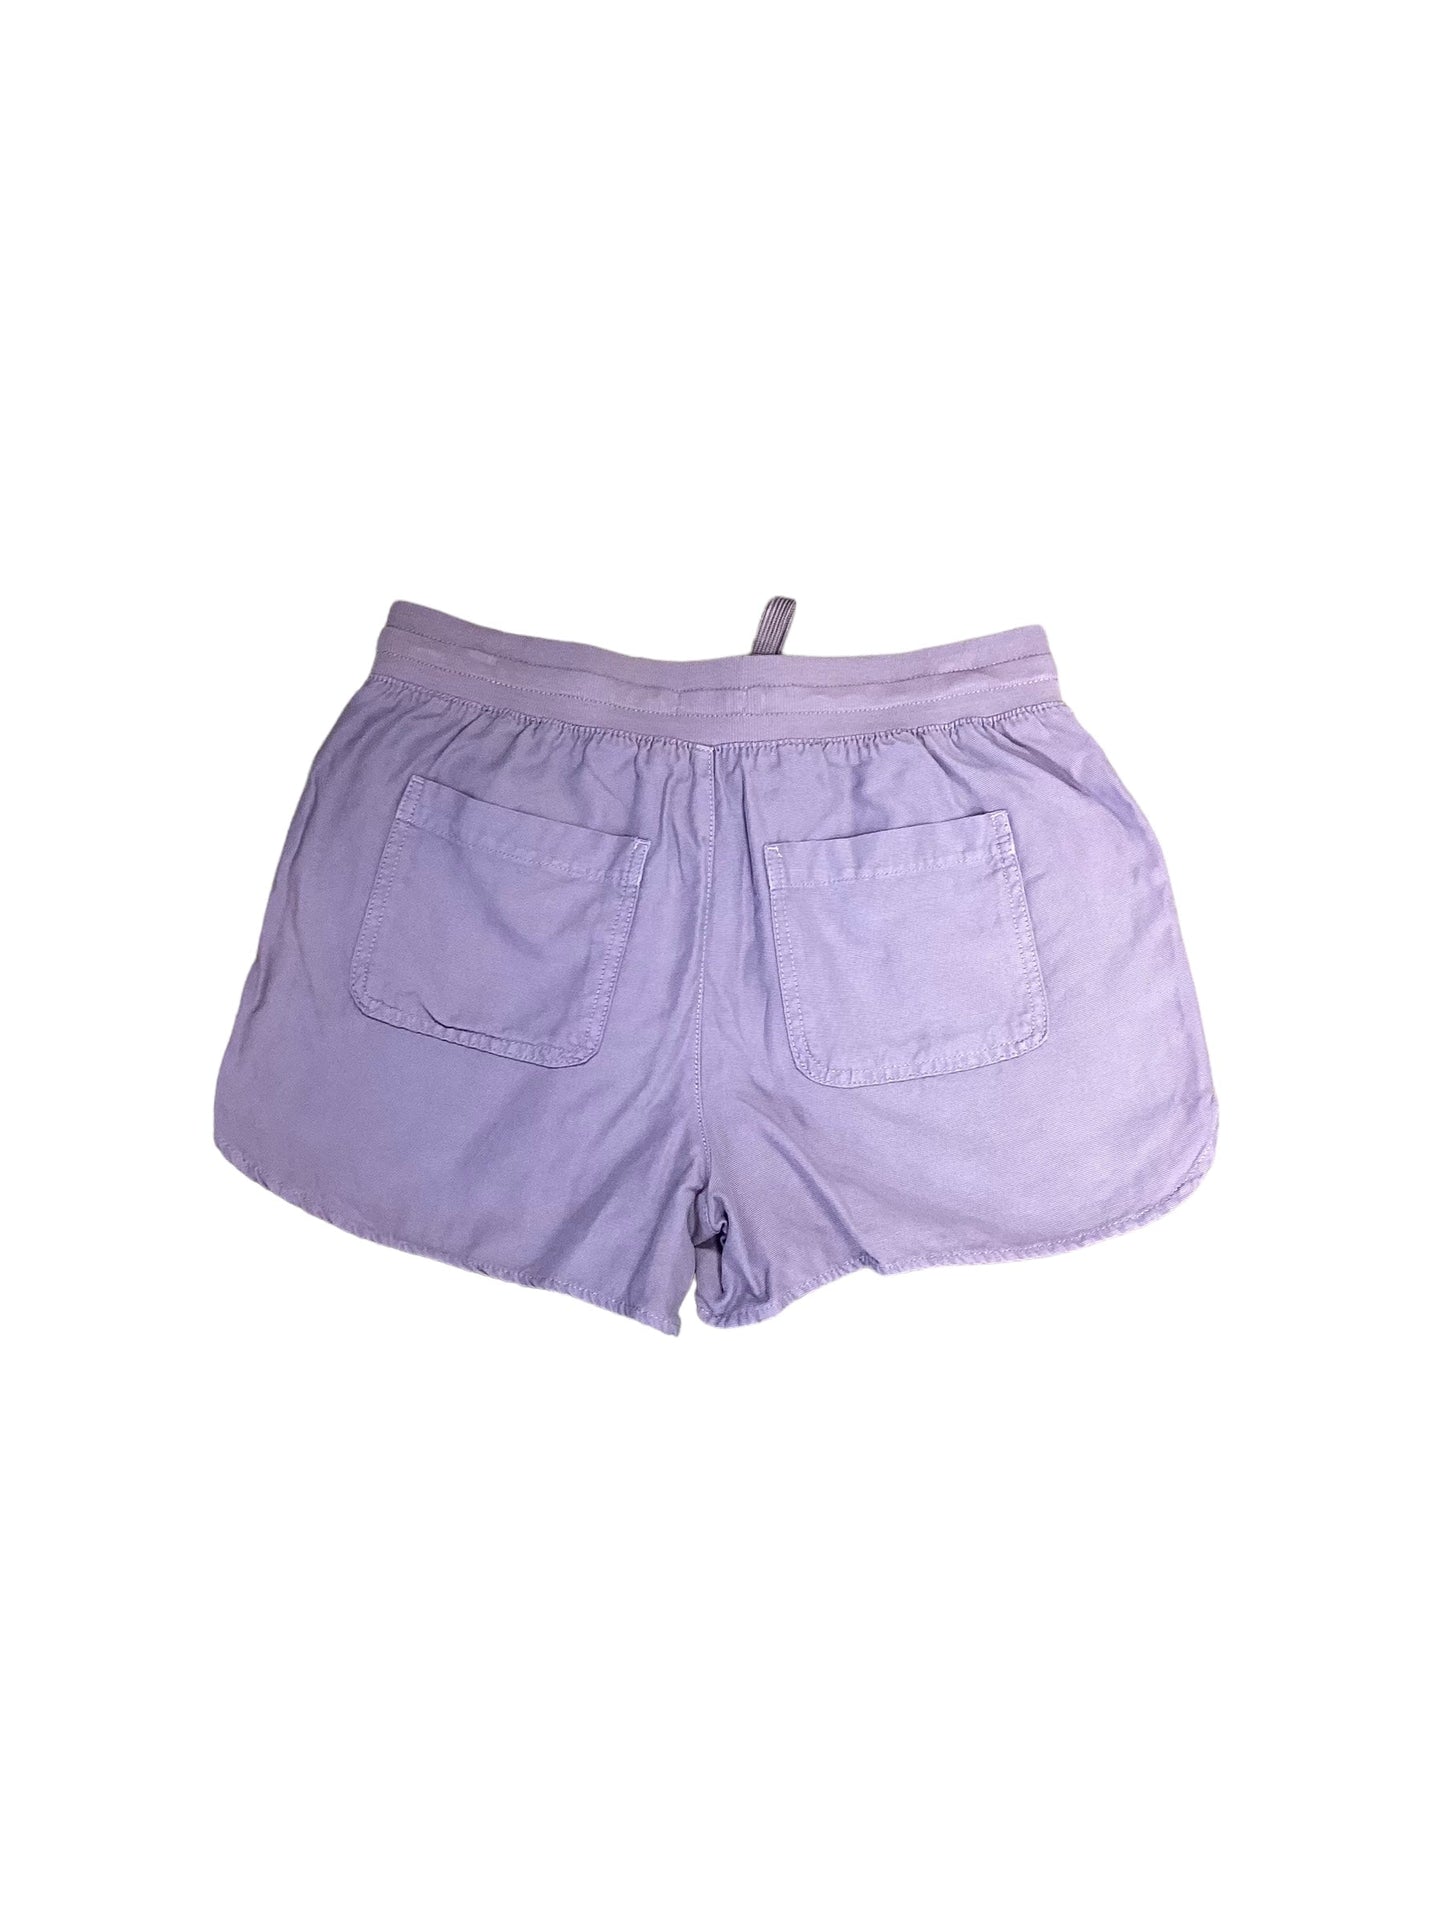 Purple Shorts Maurices, Size M